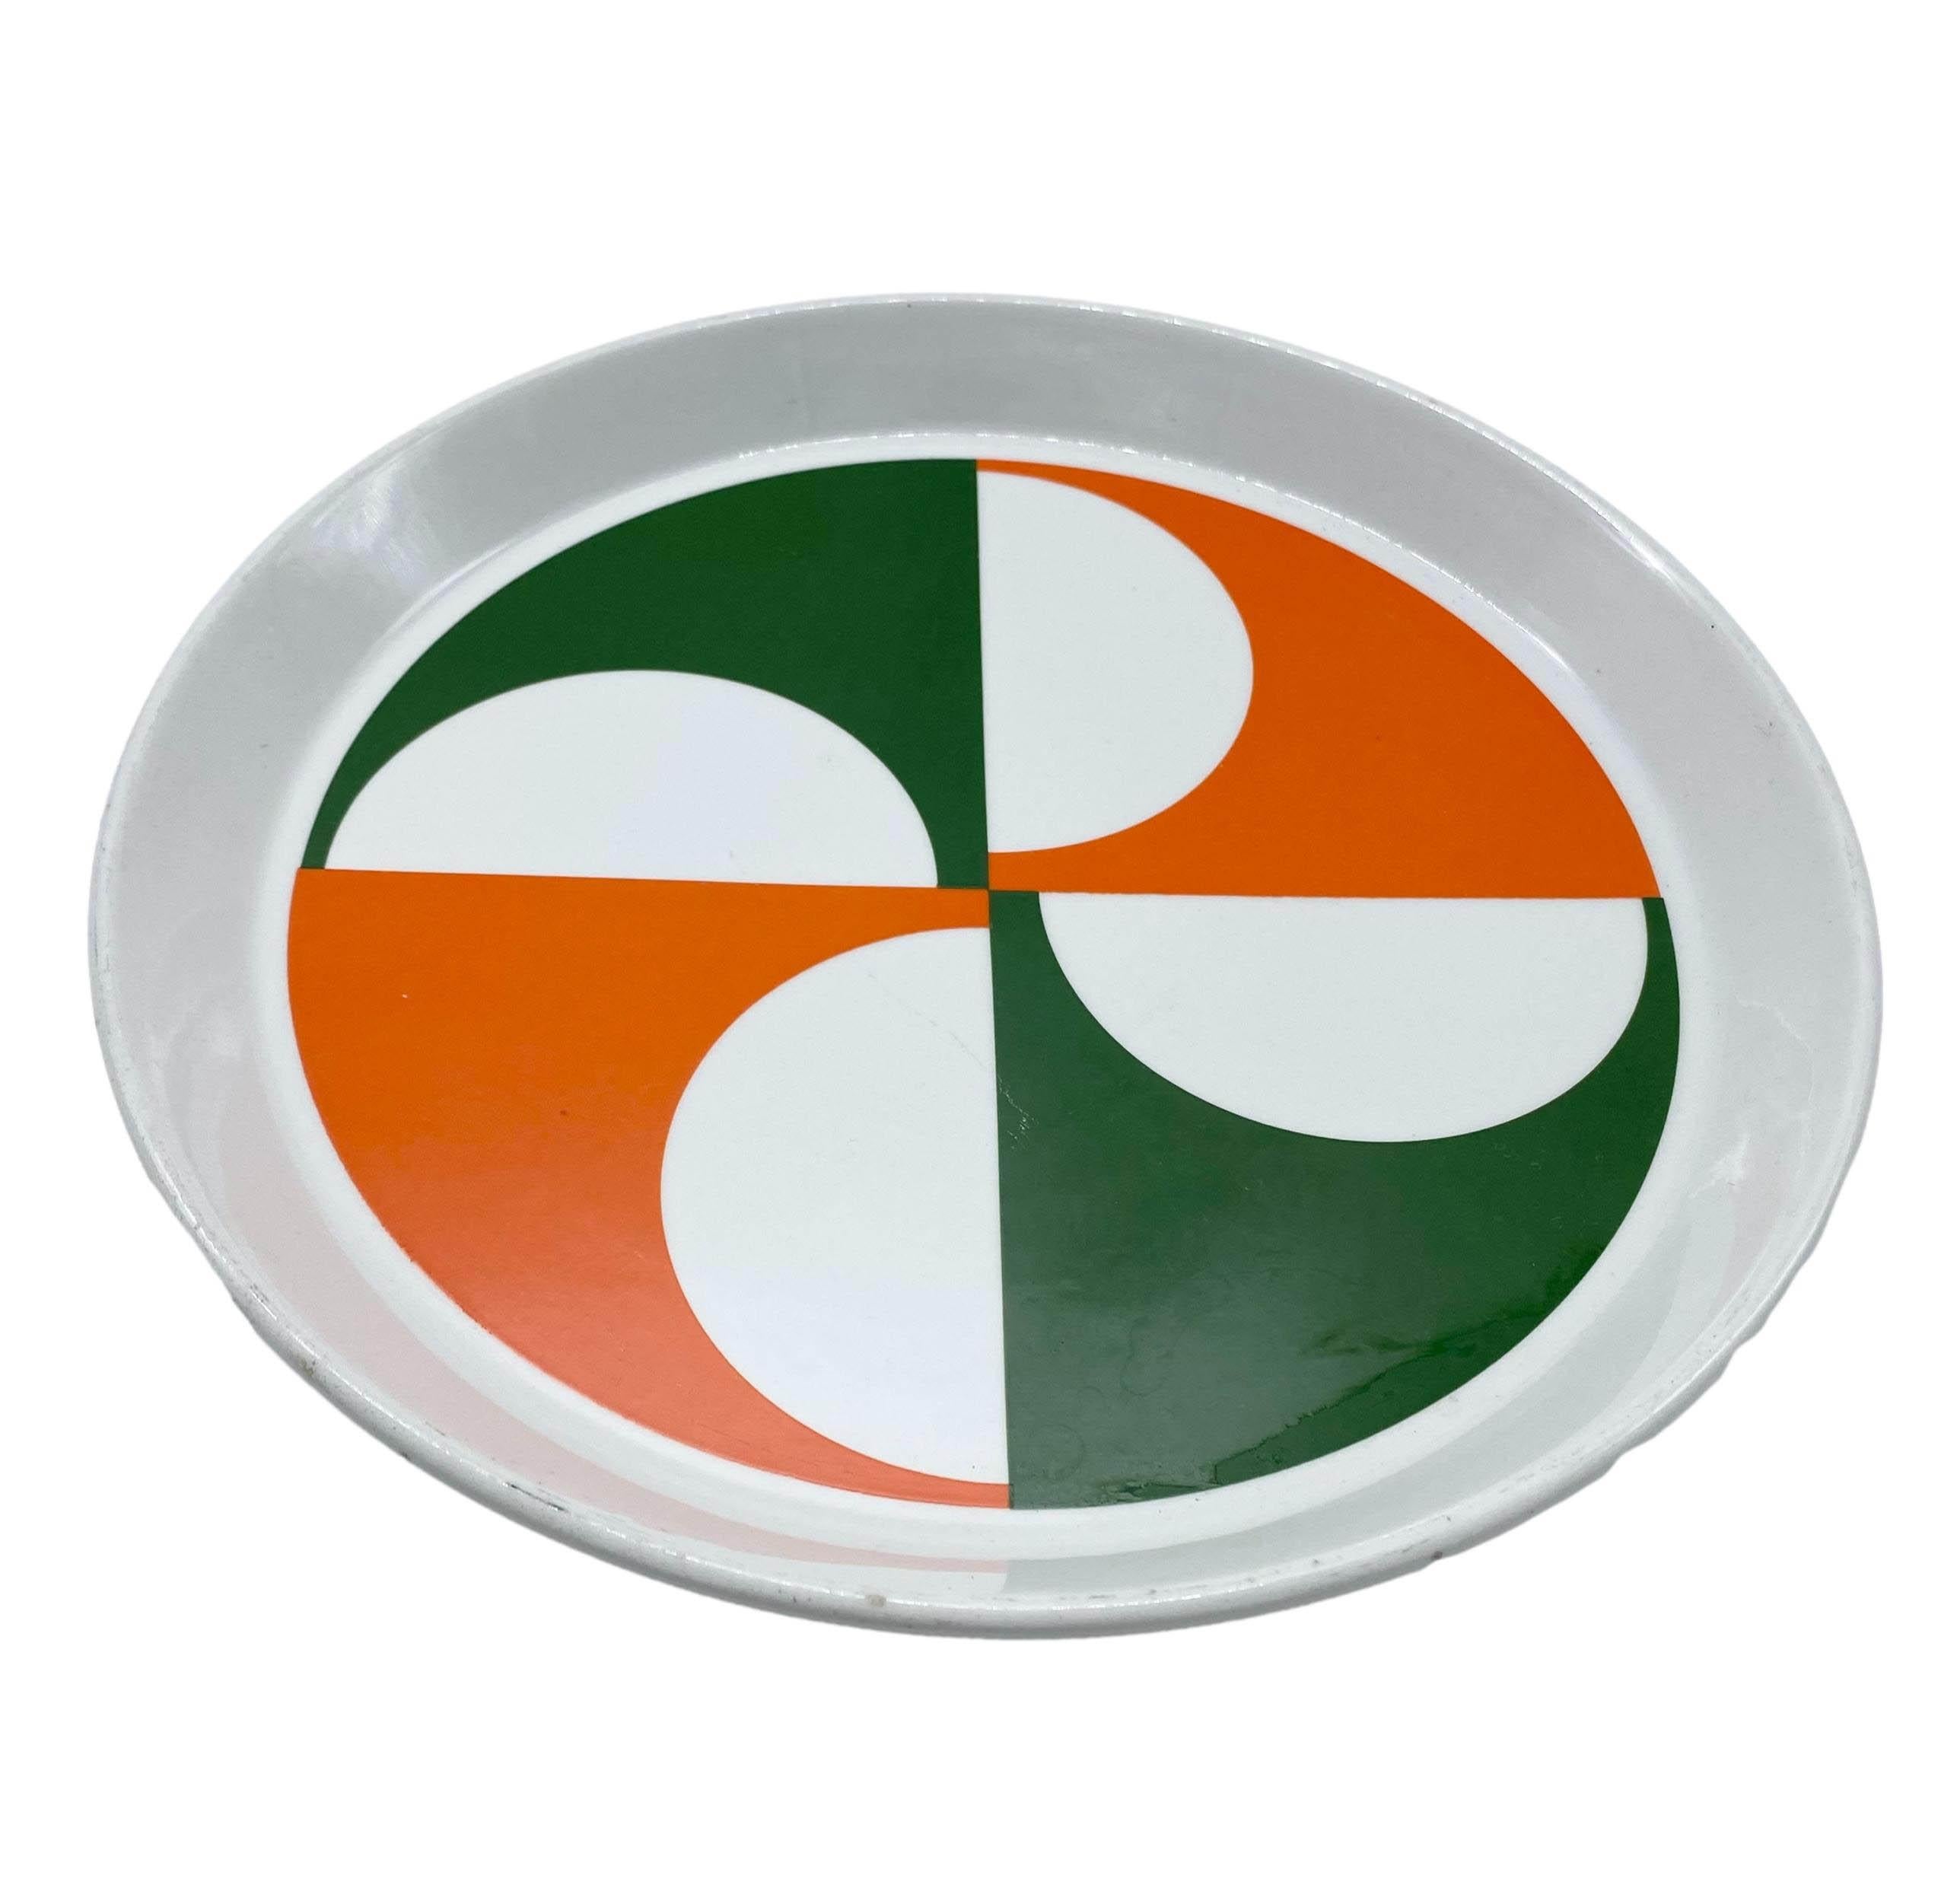 A plate designed by Gio Ponti as part of the 